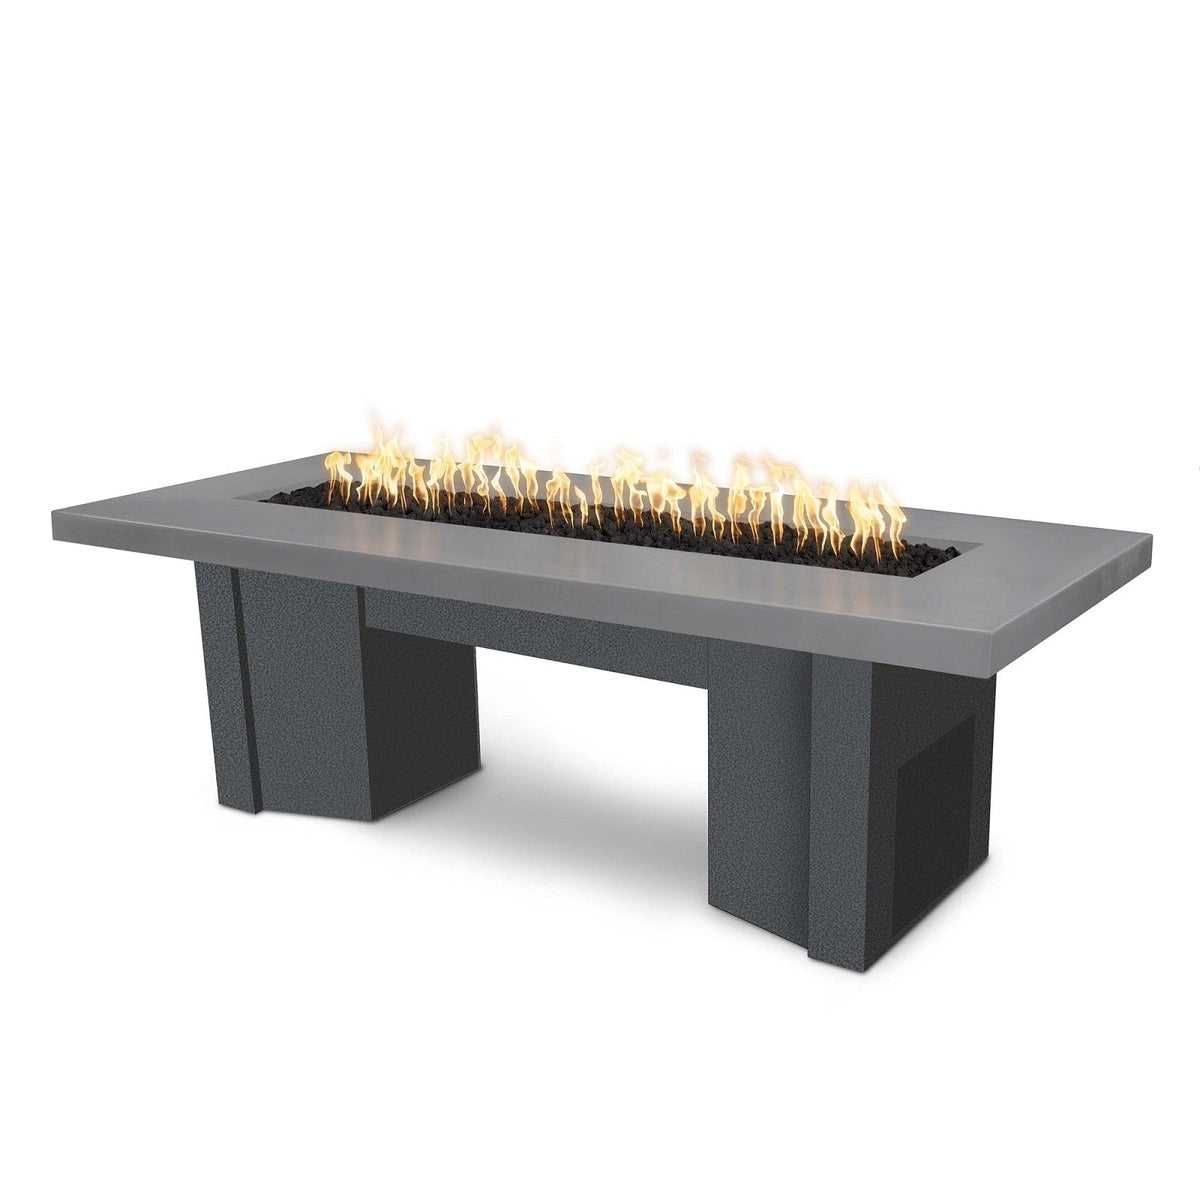 The Outdoor Plus Fire Features Natural Gray (-NGY) / Silver Vein Powder Coated Steel (-SLV) The Outdoor Plus 78&quot; Alameda Fire Table Smooth Concrete in Natural Gas - Flame Sense System with Push Button Spark Igniter / OPT-ALMGFRC78FSEN-NG